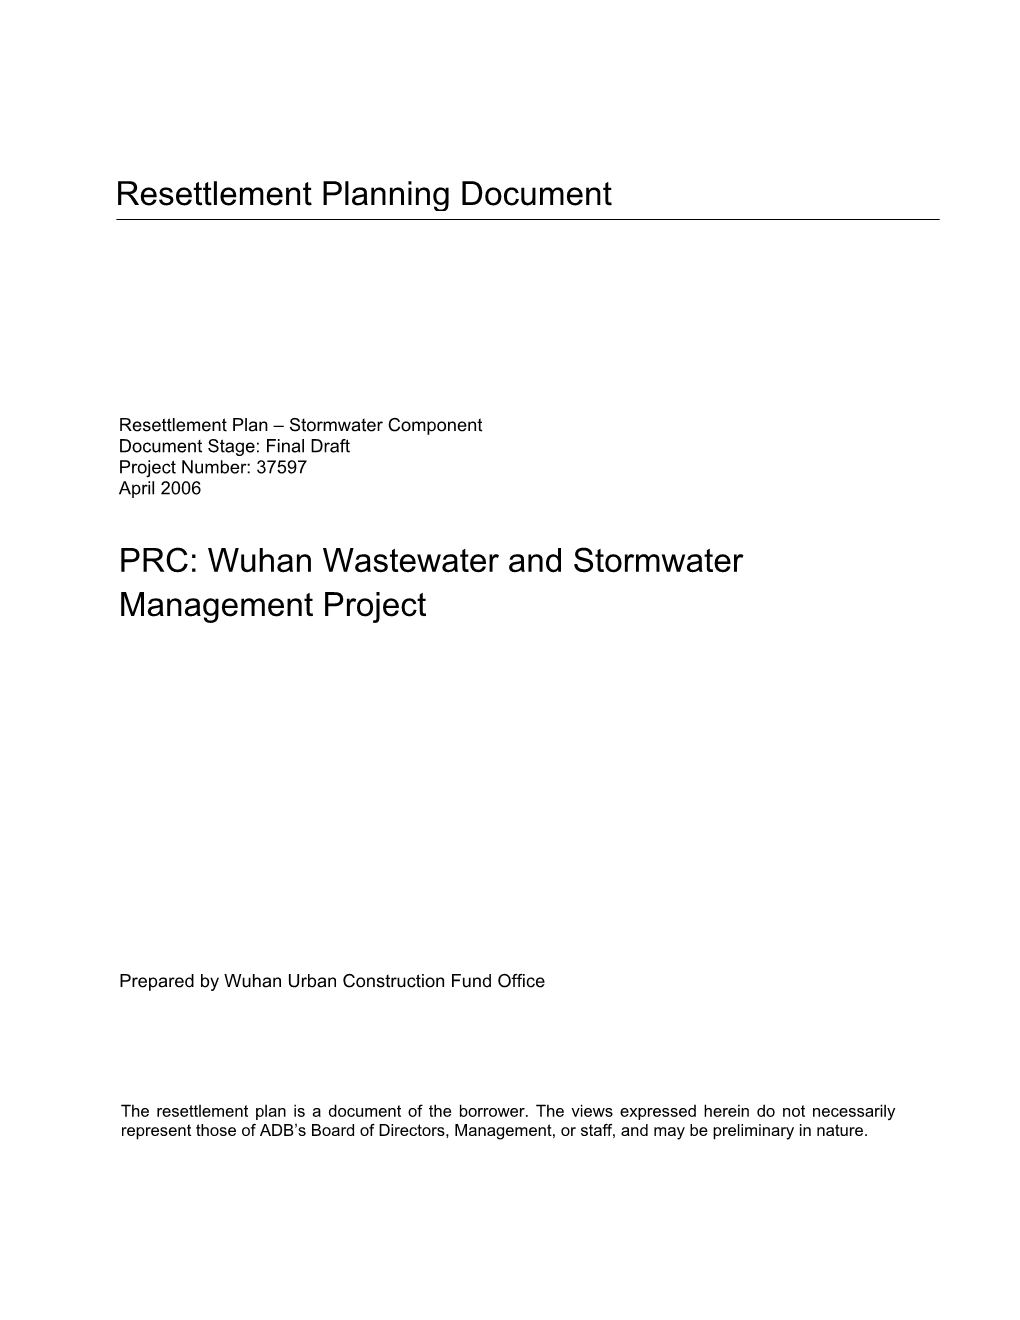 Resettlement Planning Document PRC: Wuhan Wastewater And